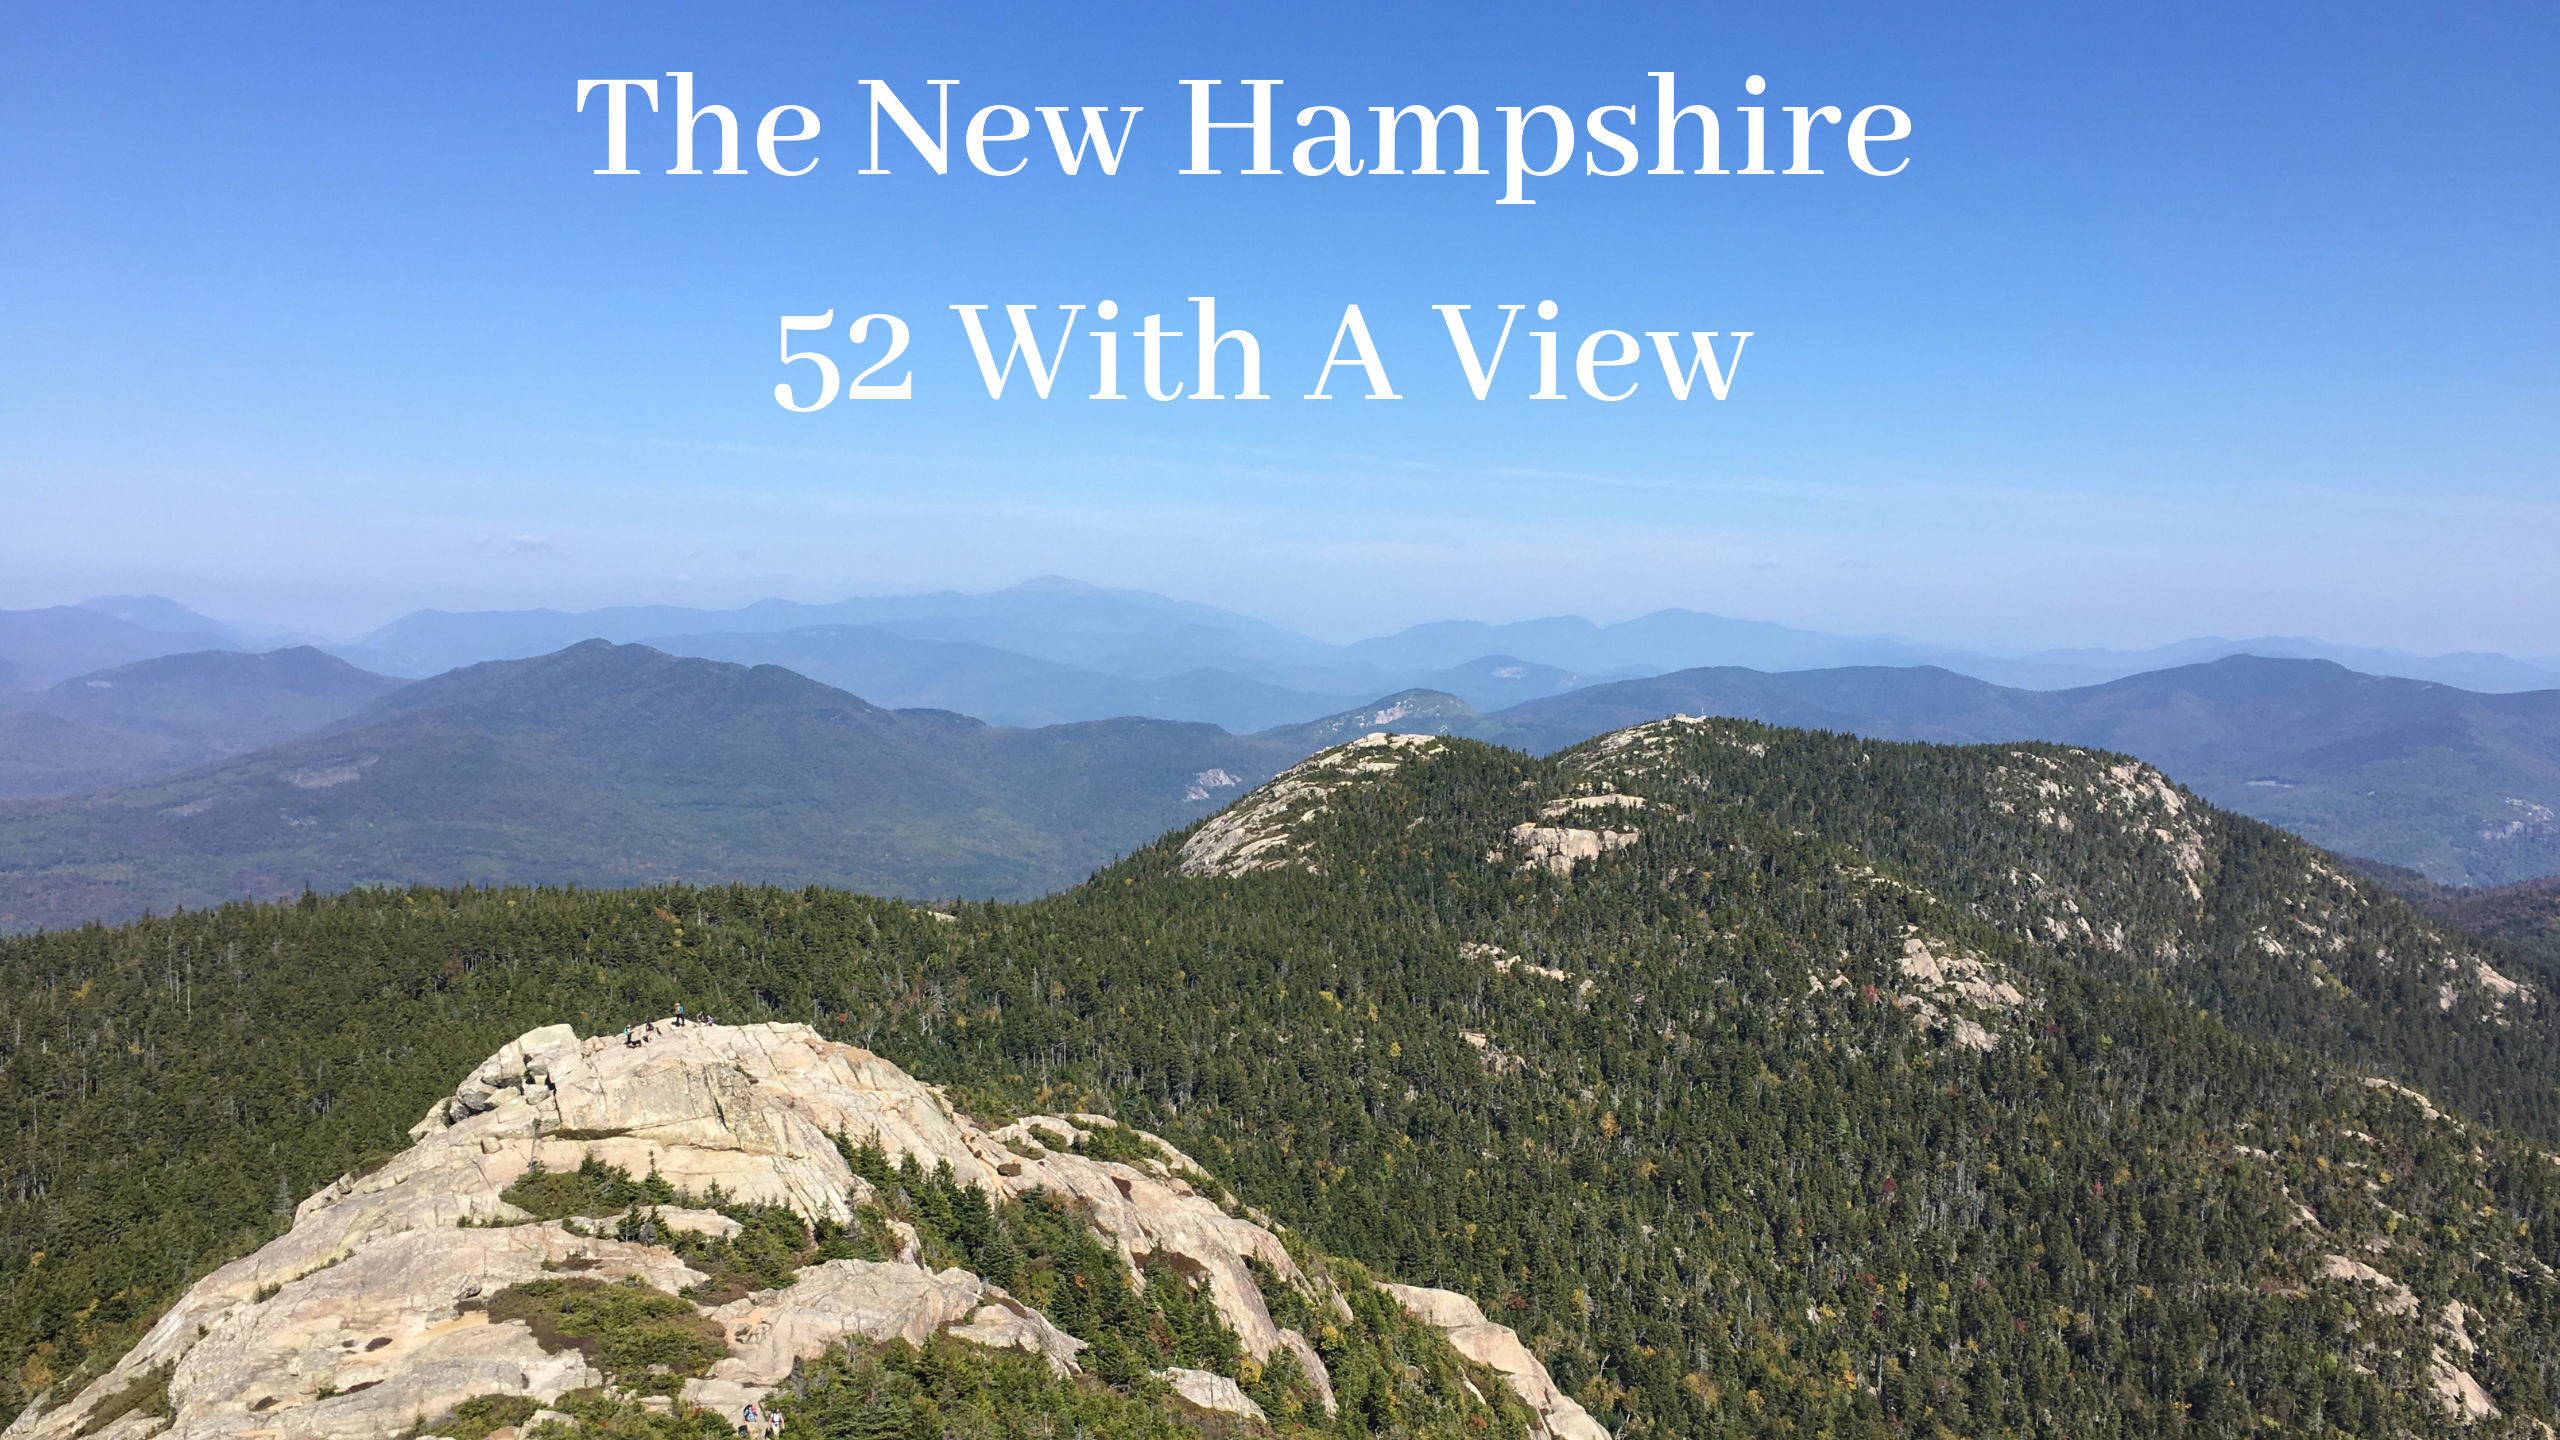 NH’s 52 With a View (52 WAV) – Shorter Hikes With Stunning Views